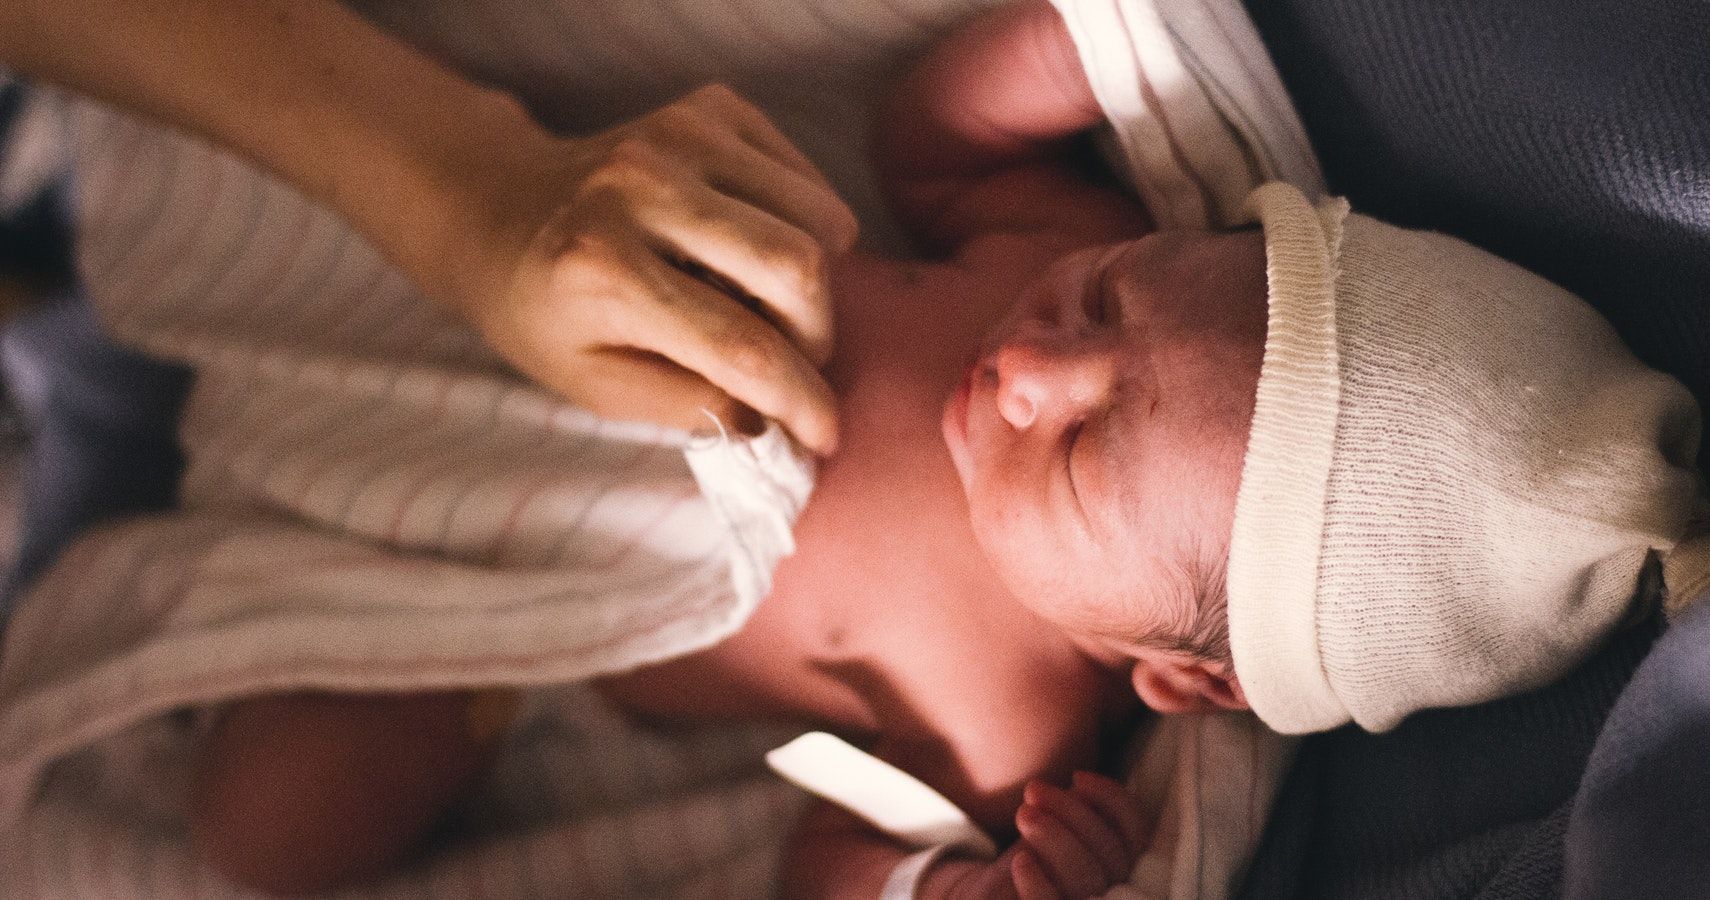 Babies Born With Syphilis Has Increased Drastically In 5 Years